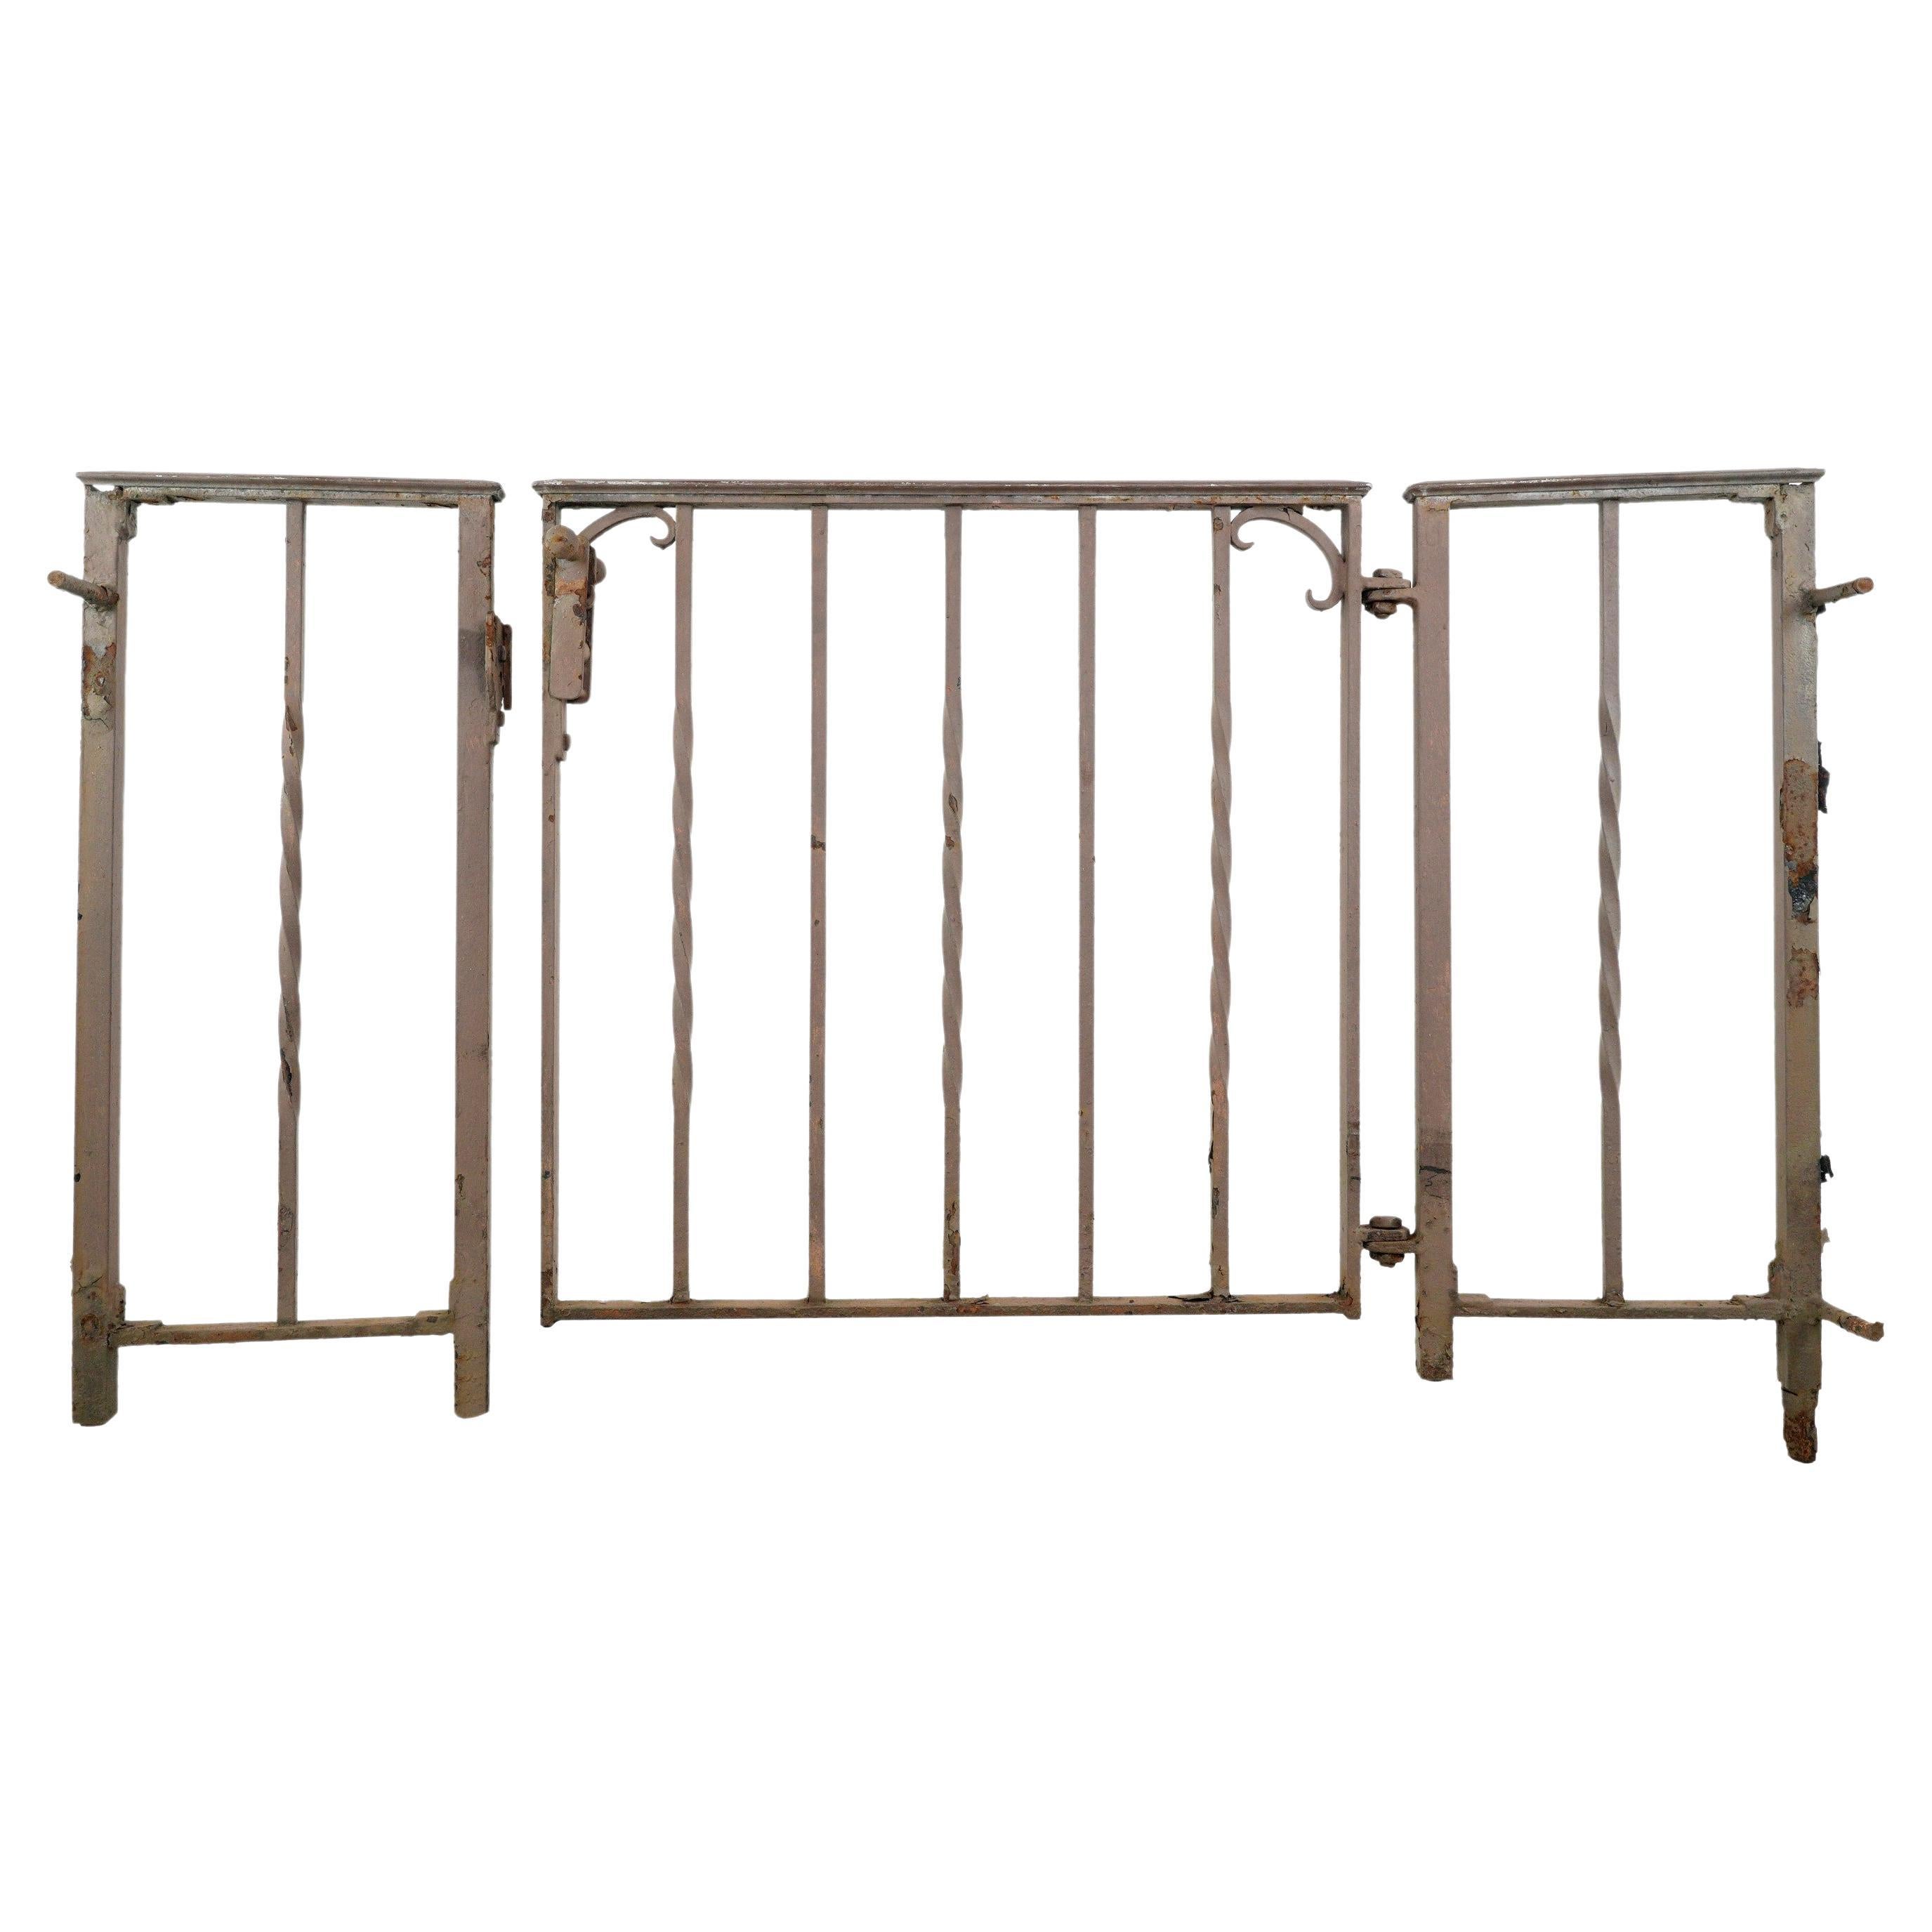 3 Piece Wrought Iron Garden Gate Set 82 in. Wide For Sale